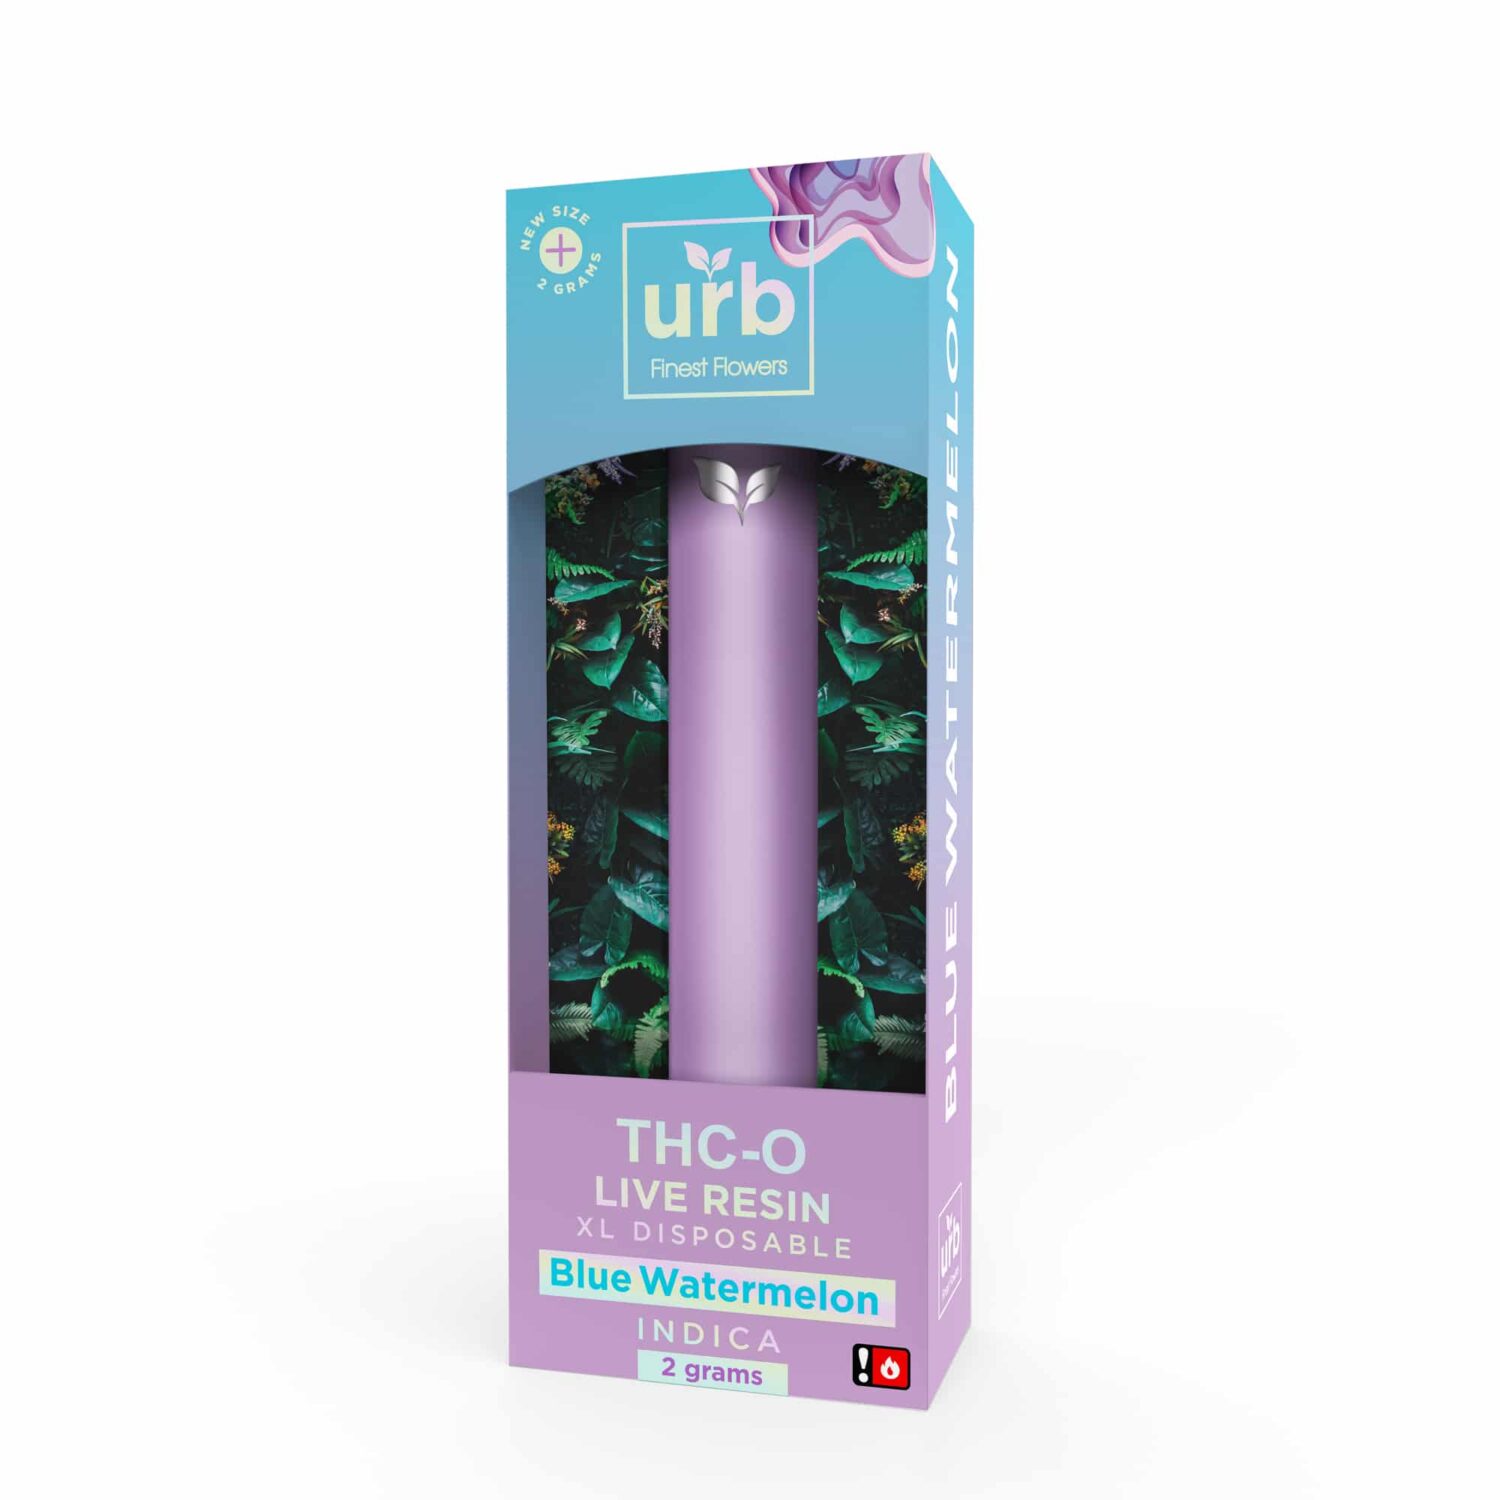 URB-Live-Resin-THC-O-Disposable-2g-Blue-Watermelon